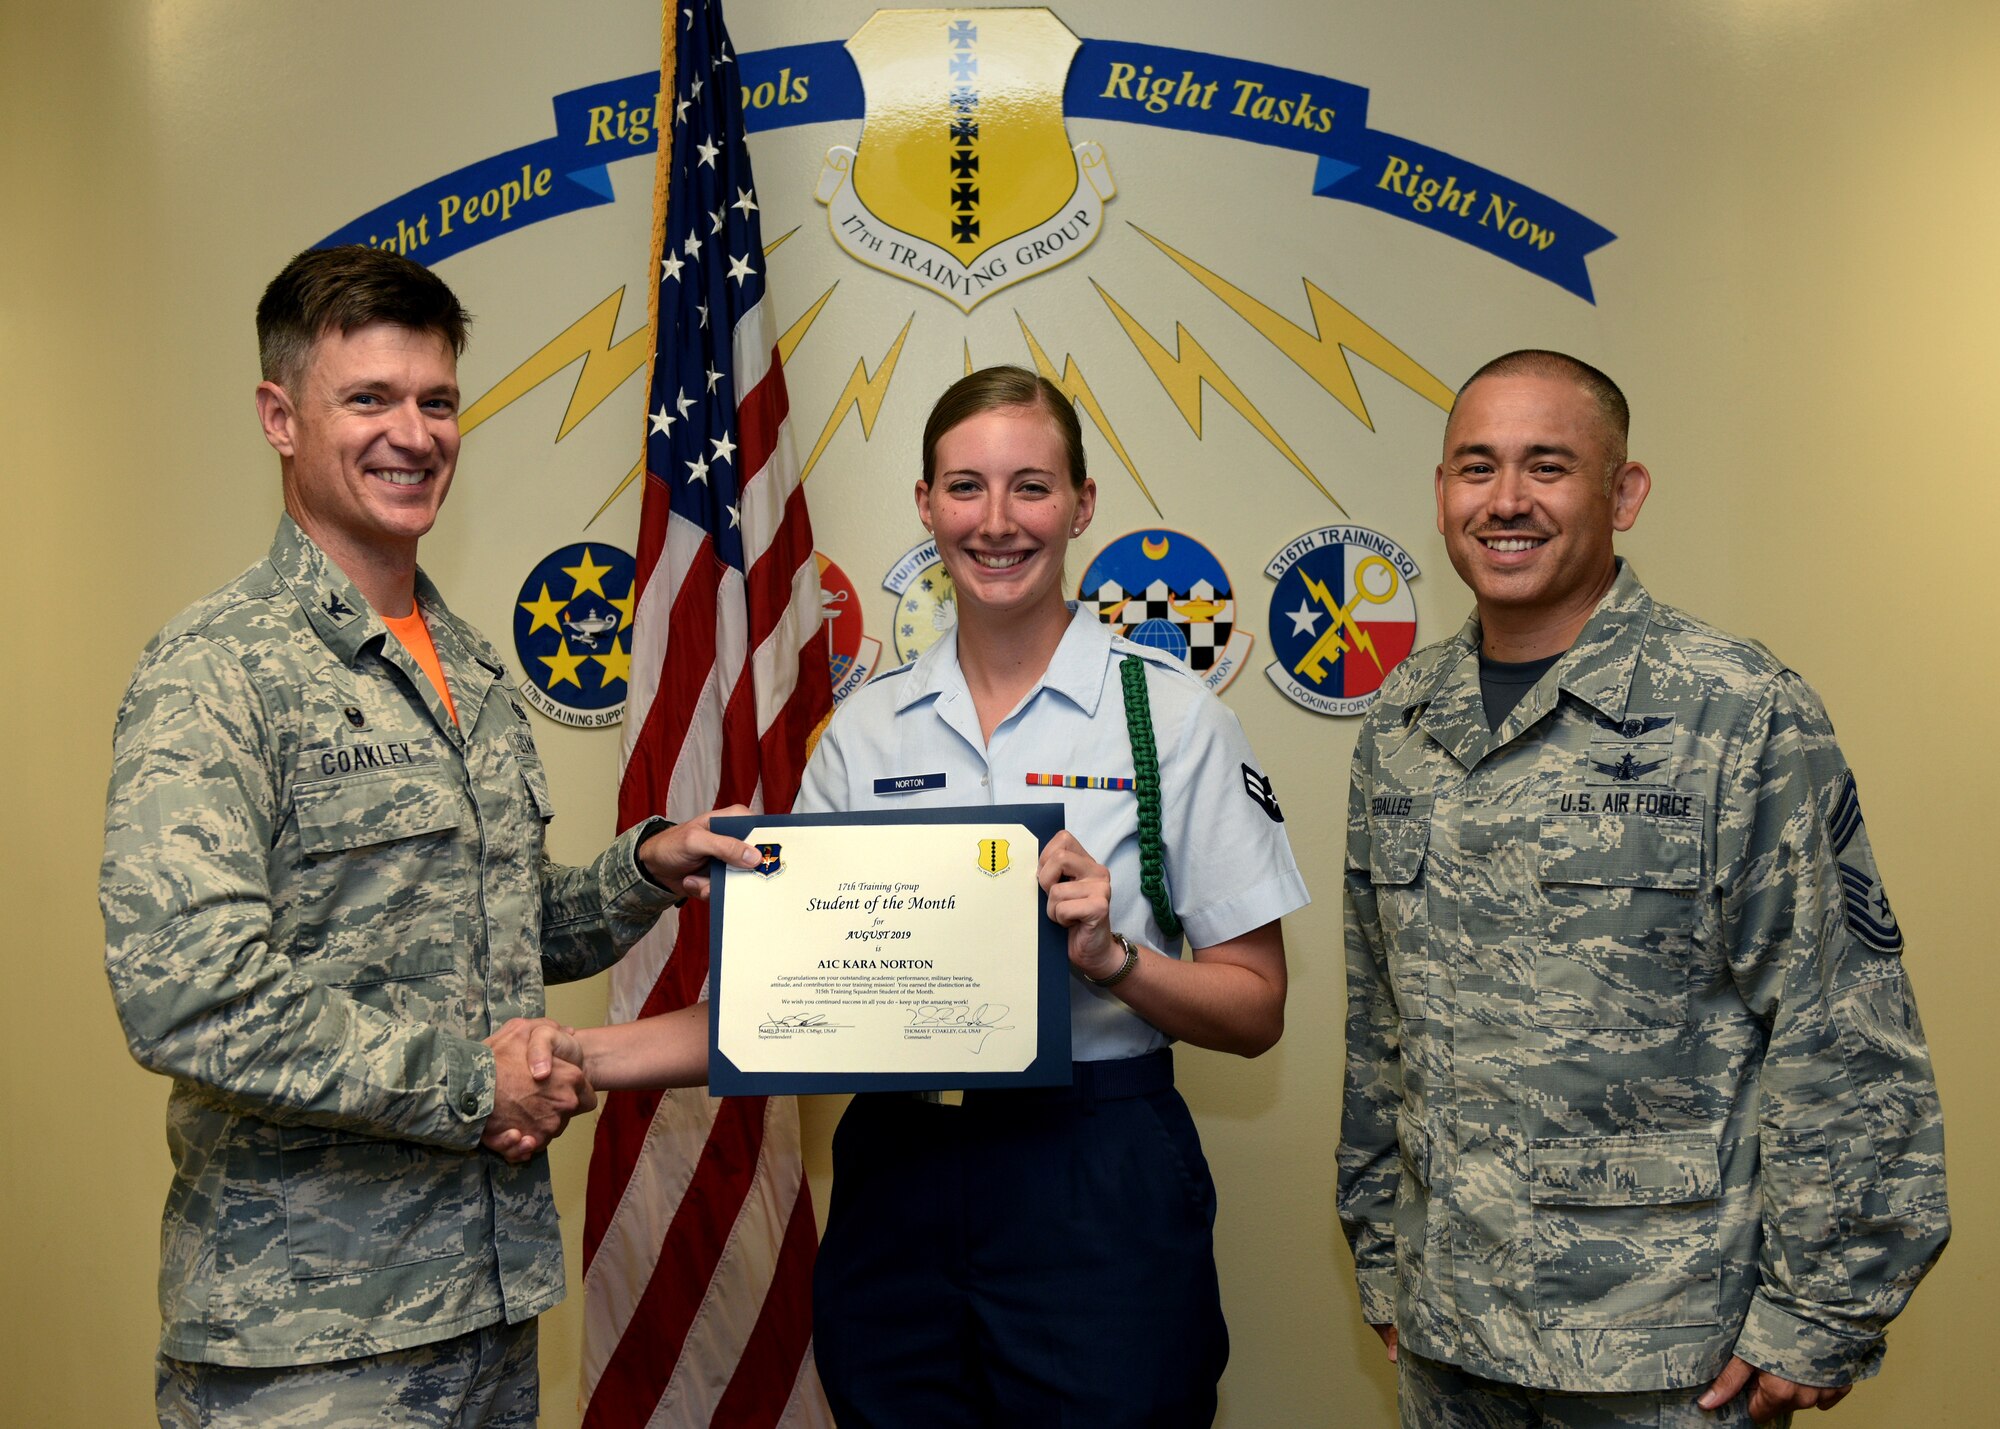 U.S. Air Force Col. Thomas Coakley, 17th Training Group commander, presents the 315th Training Squadron Student of the Month award to Airman 1st Class Kara Norton, 315th TRS student, at Brandenburg Hall on Goodfellow Air Force Base, Texas, September 6, 2019. The 315th TRS’s vision is to develop combat-ready intelligence, surveillance and reconnaissance professionals and promote an innovative squadron culture and identity unmatched across the U.S. Air Force. (U.S. Air Force photo by Airman 1st Class Robyn Hunsinger/Released)